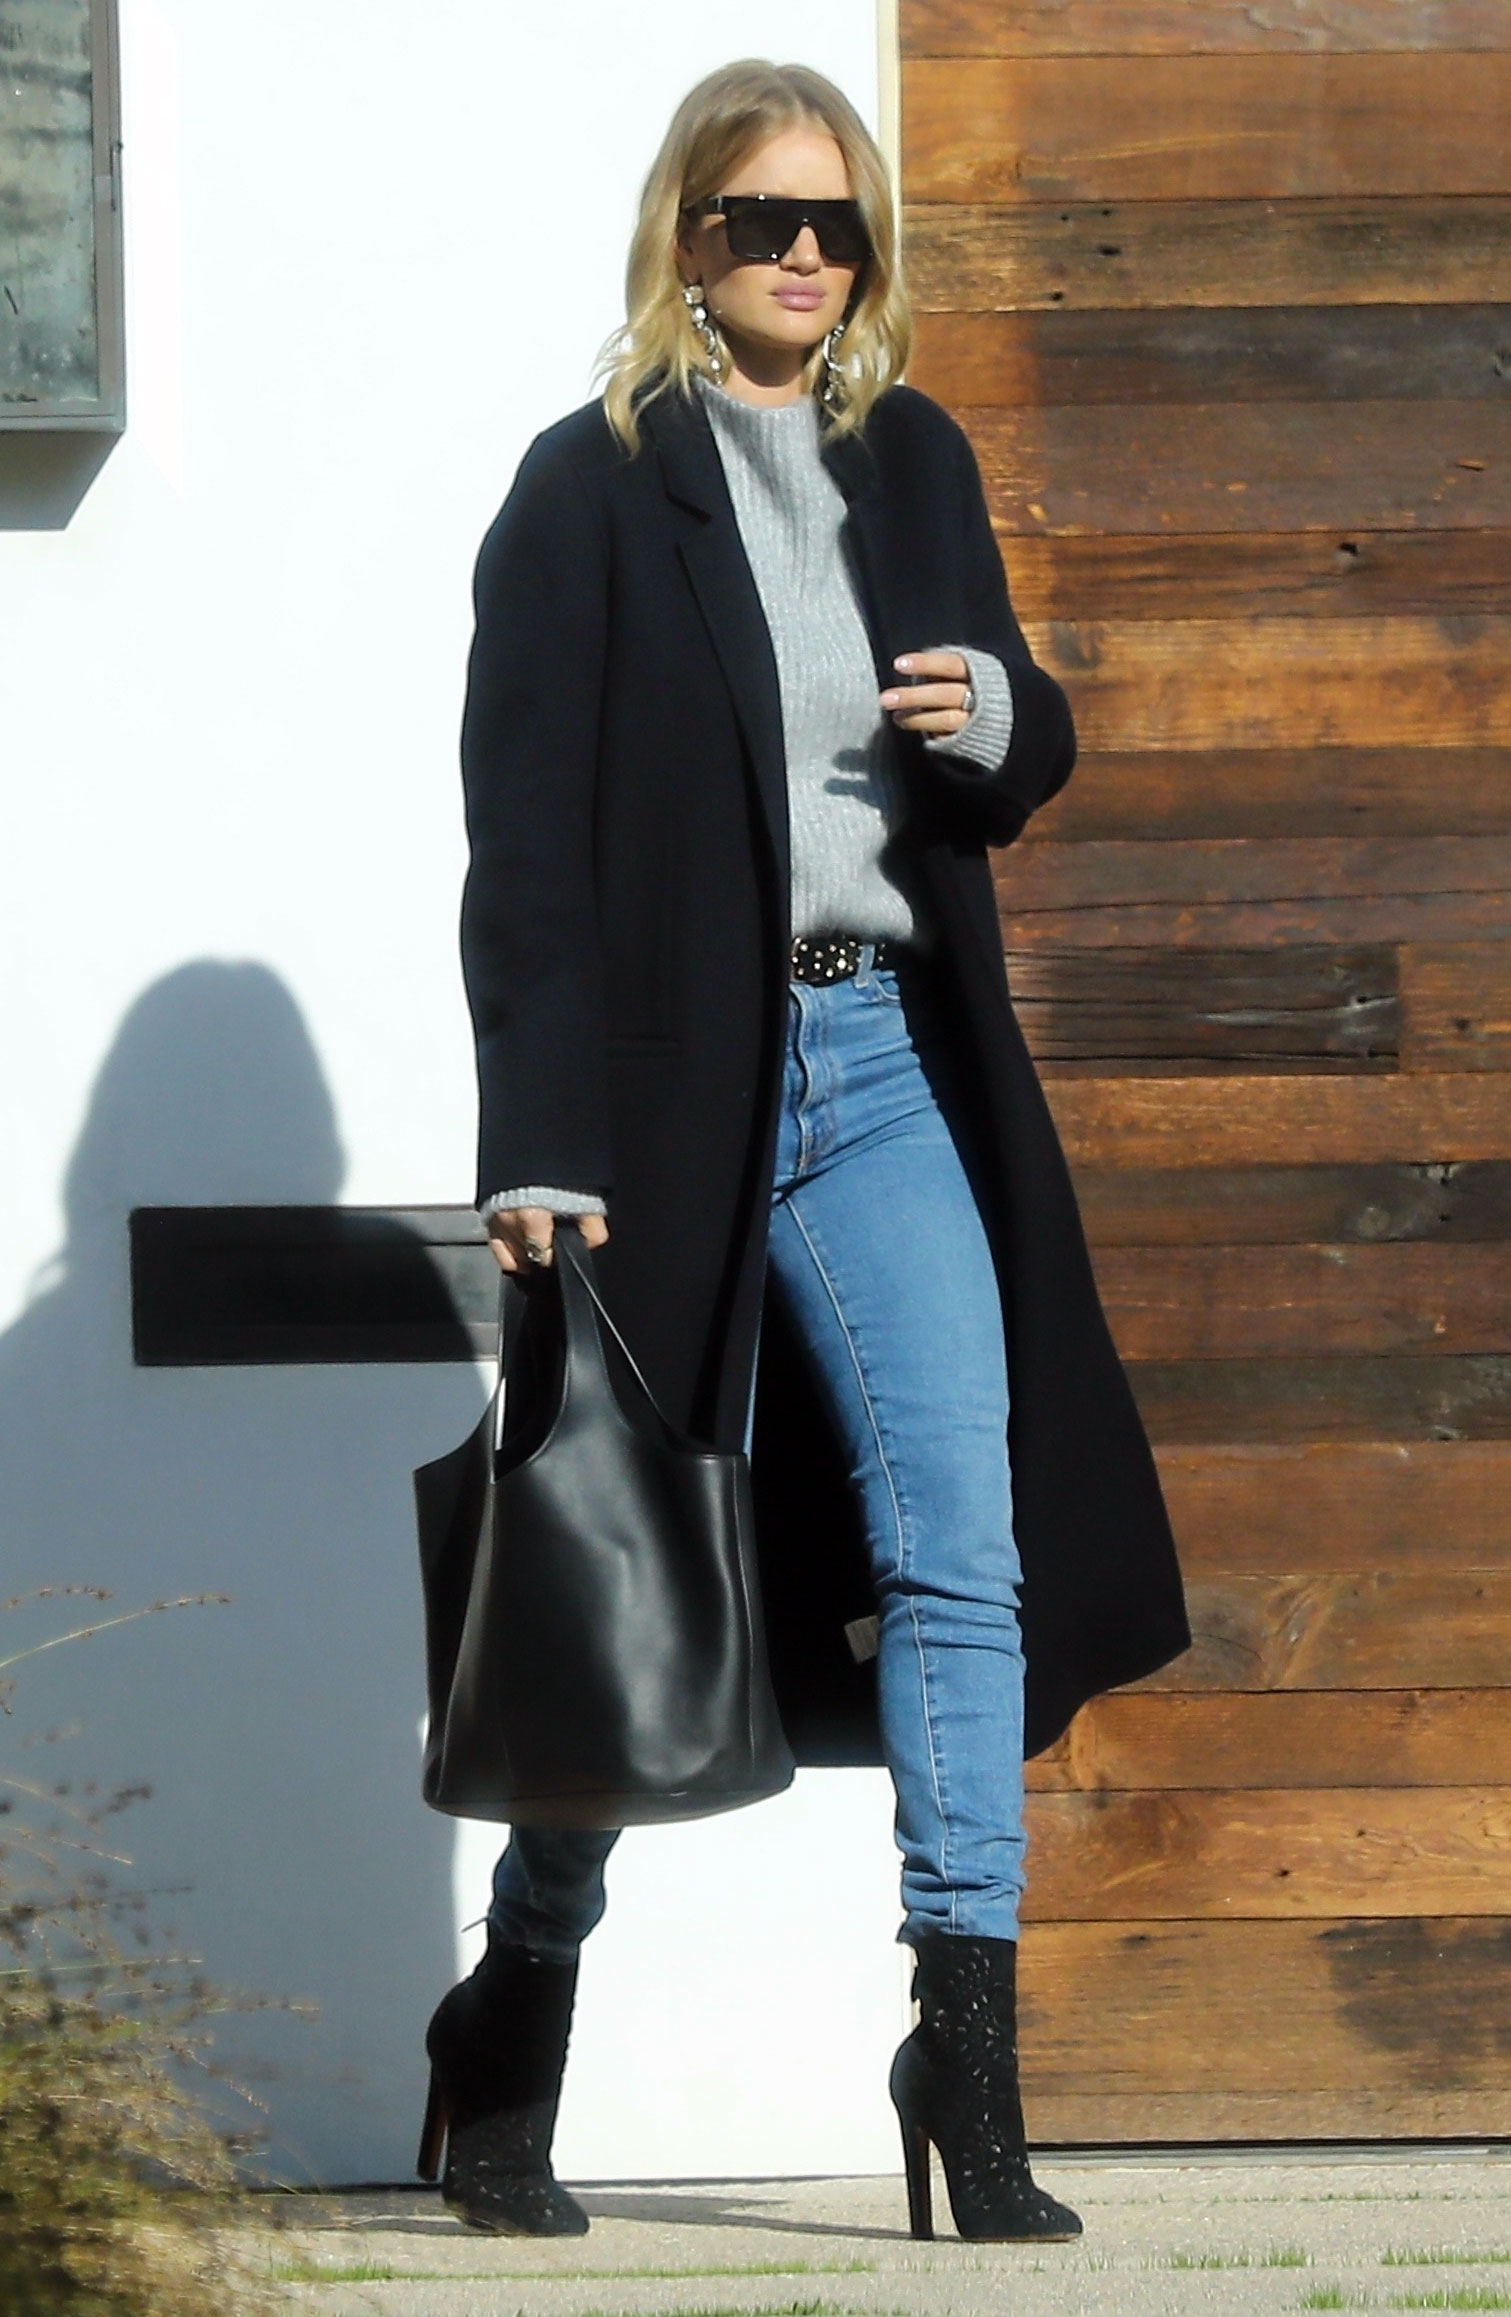 Rosie Huntington-Whiteley's black wool coat, grey sweater, skinny jeans and ankle boots celebrity look for less outfit idea